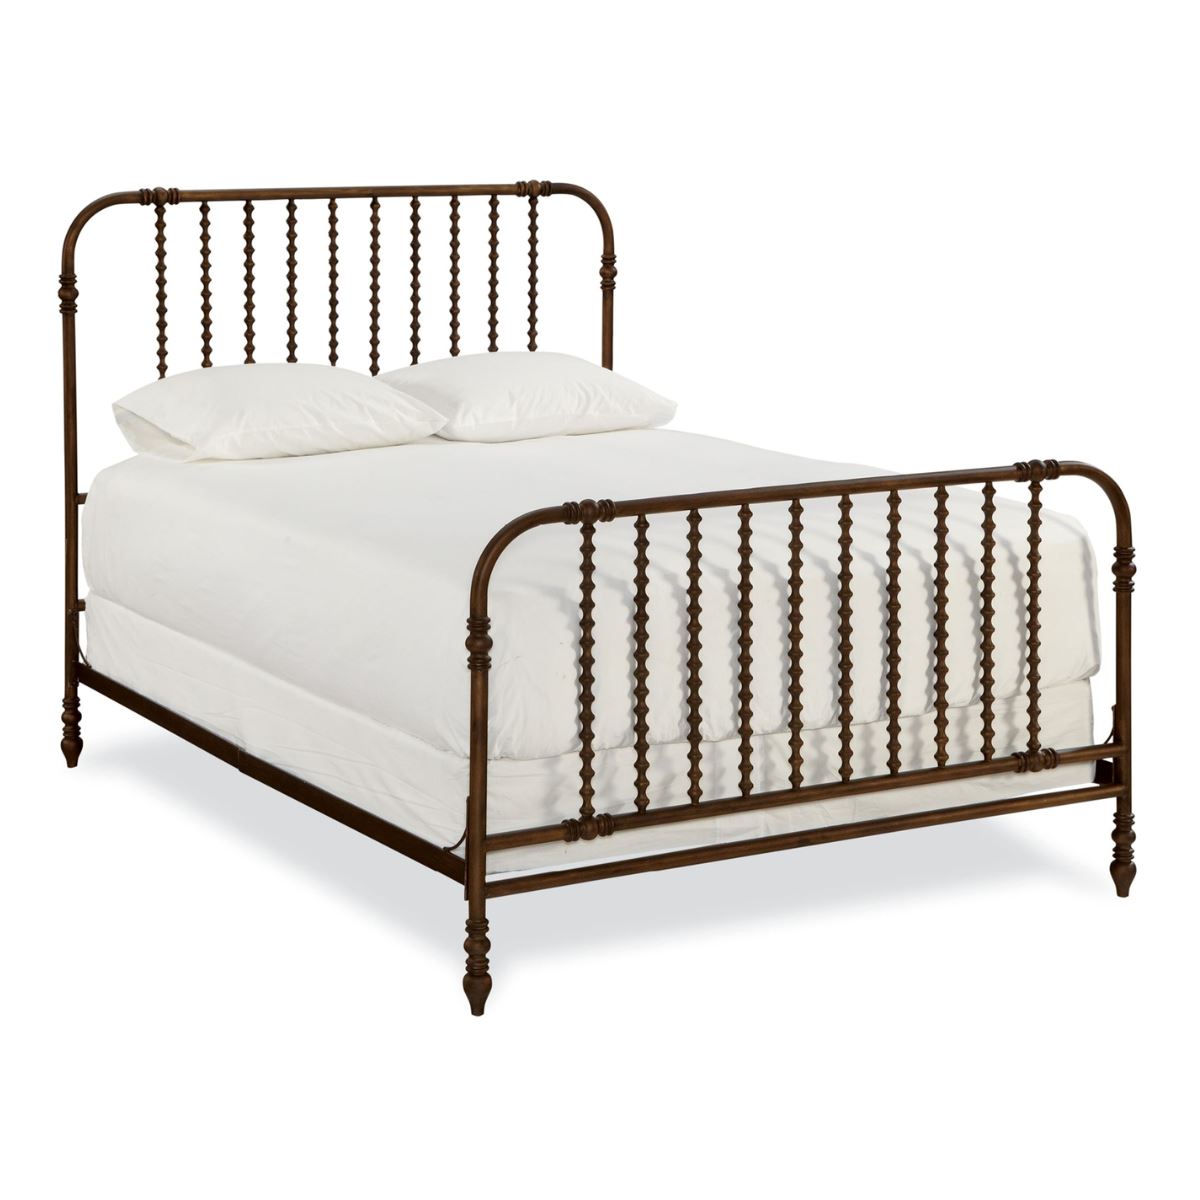 Weslie Bed Frame - Queen. Right angle view.